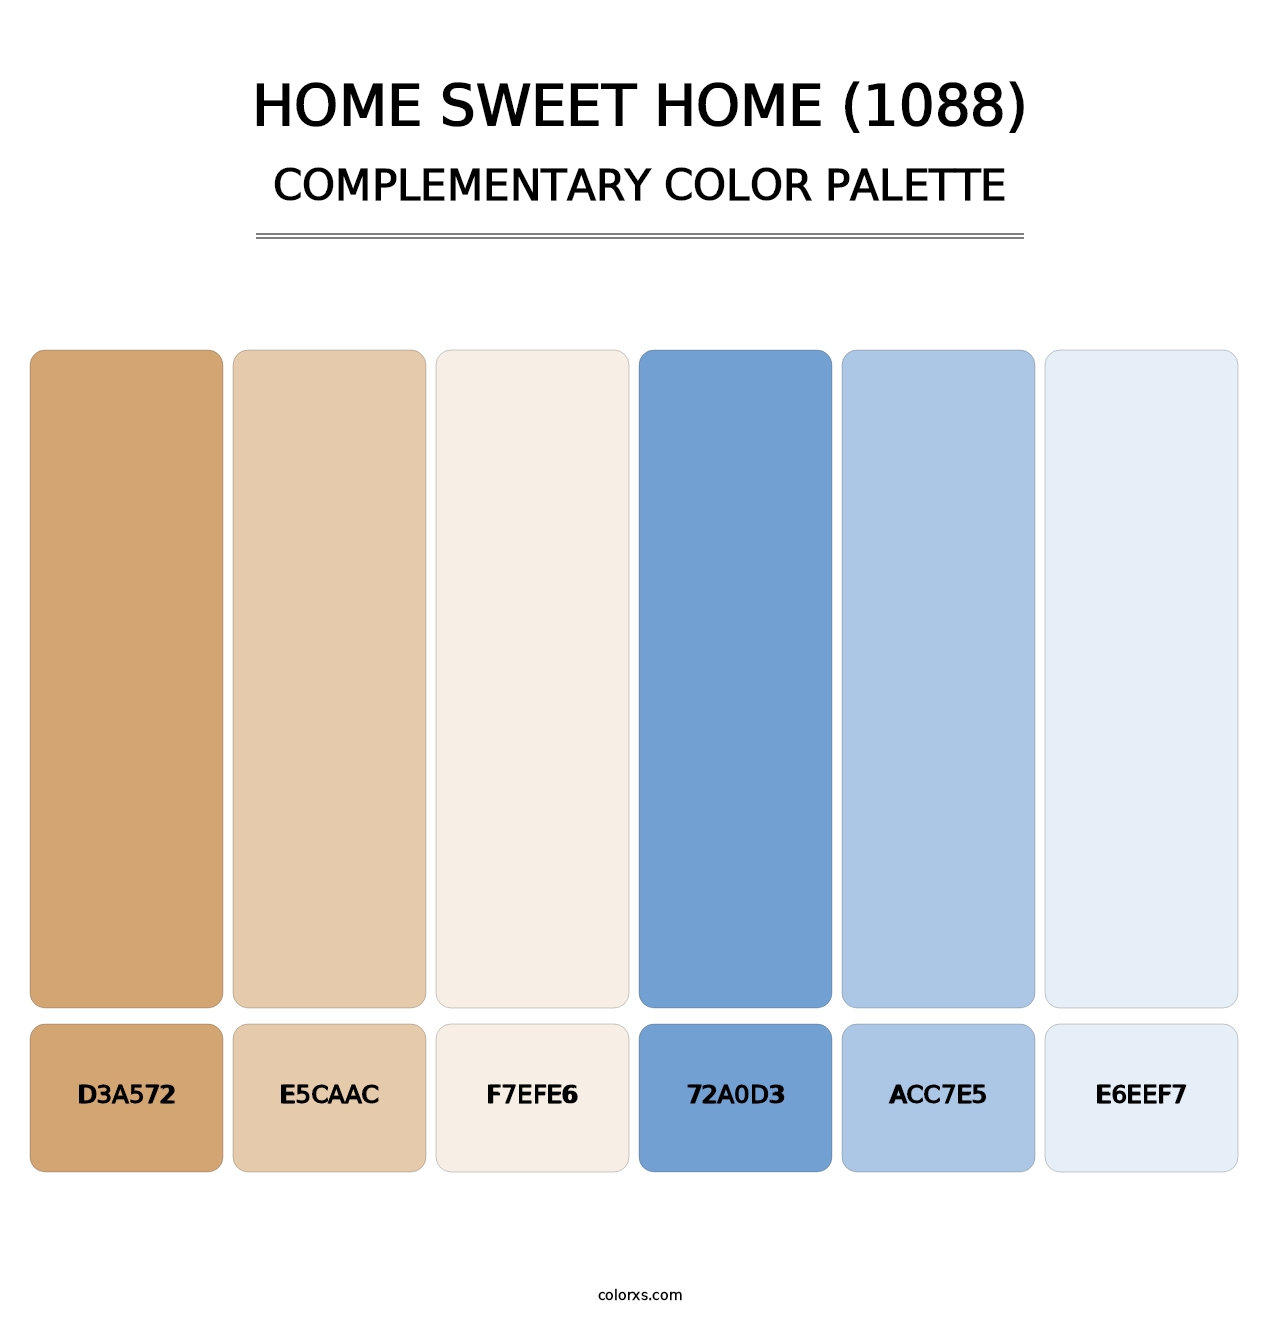 Home Sweet Home (1088) - Complementary Color Palette